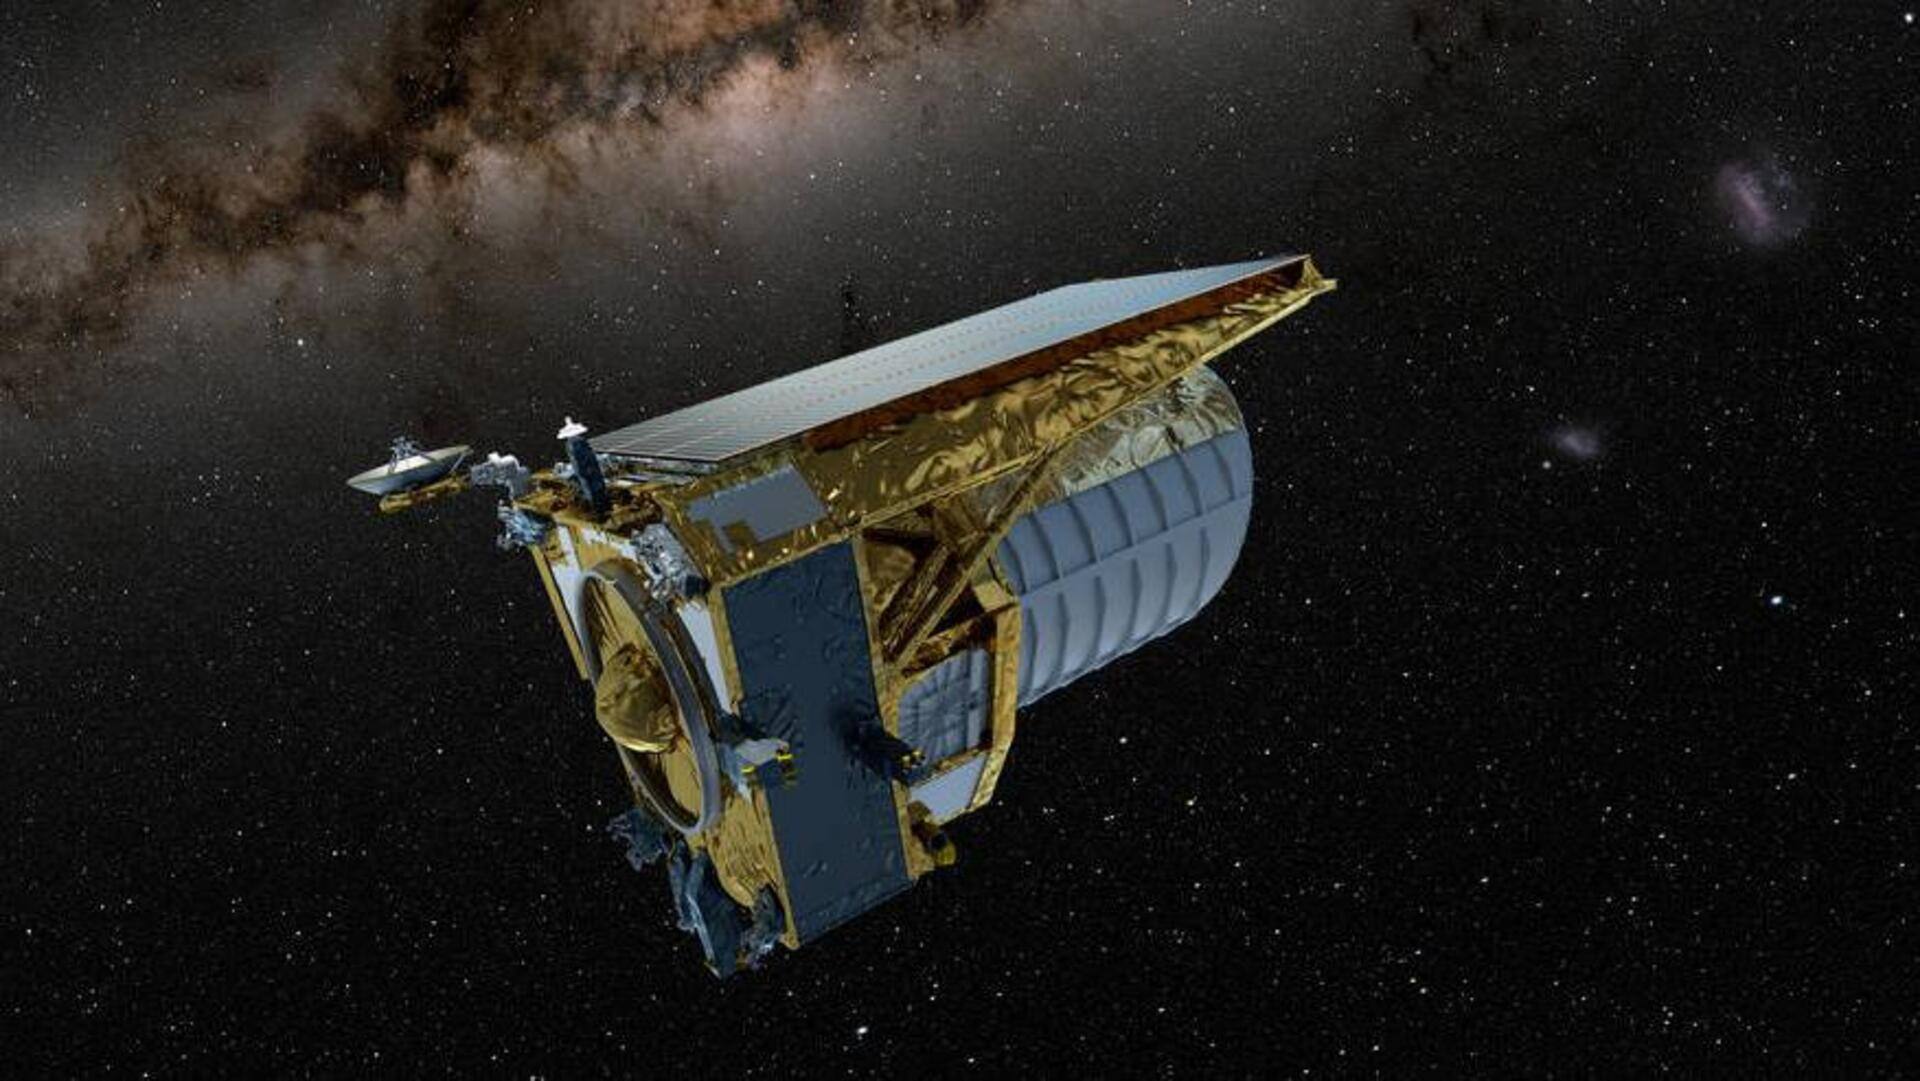 ESA's Euclid mission launches to explore dark mysteries of cosmos